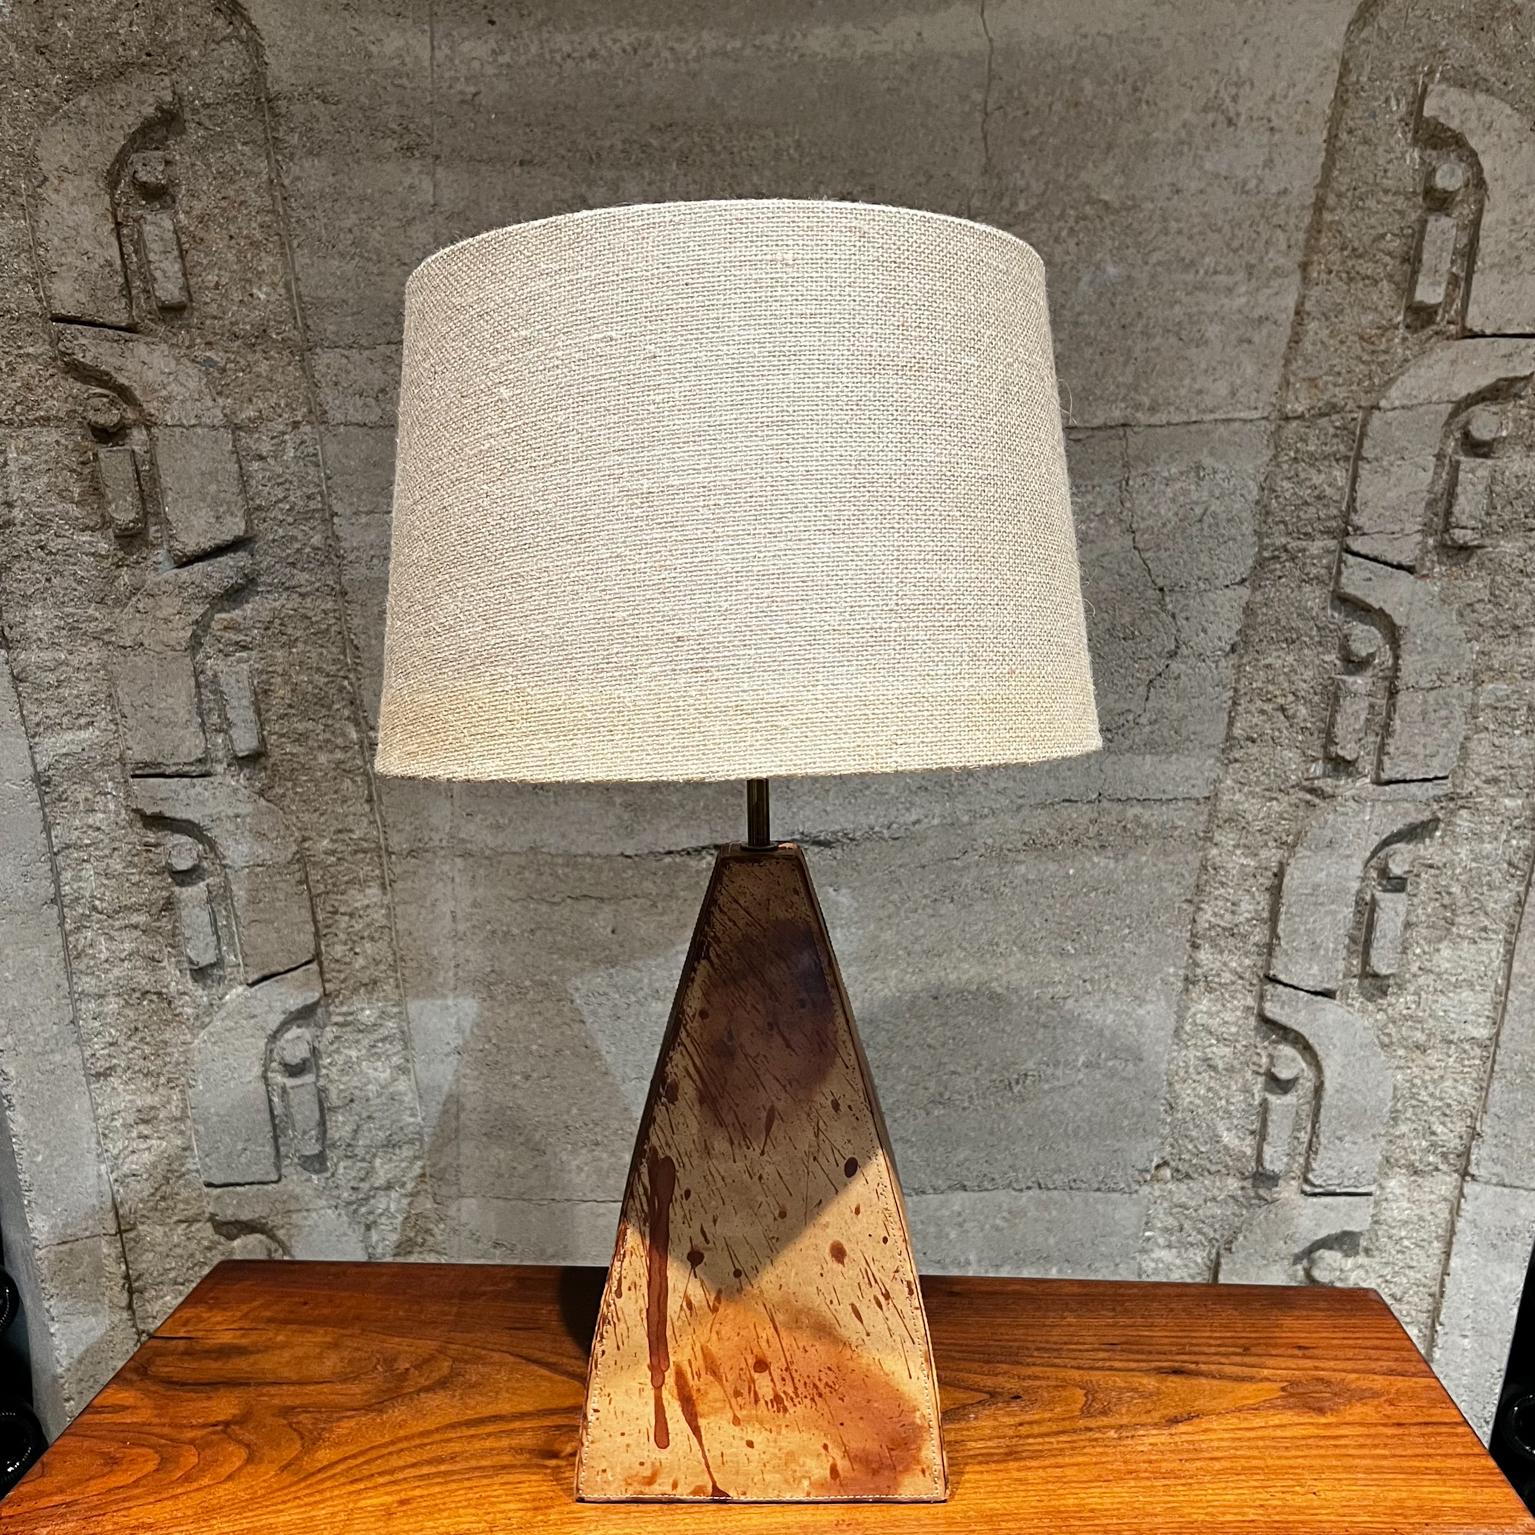 1970s Artistic Table Lamp Modern Design Leather Wrapped with Top Stitching
Approximately 19.75H to socket x 8 x 8
One of a kind table lamp with metal shape frame wrapped in leather.
Leather with vintage patina and beautiful top